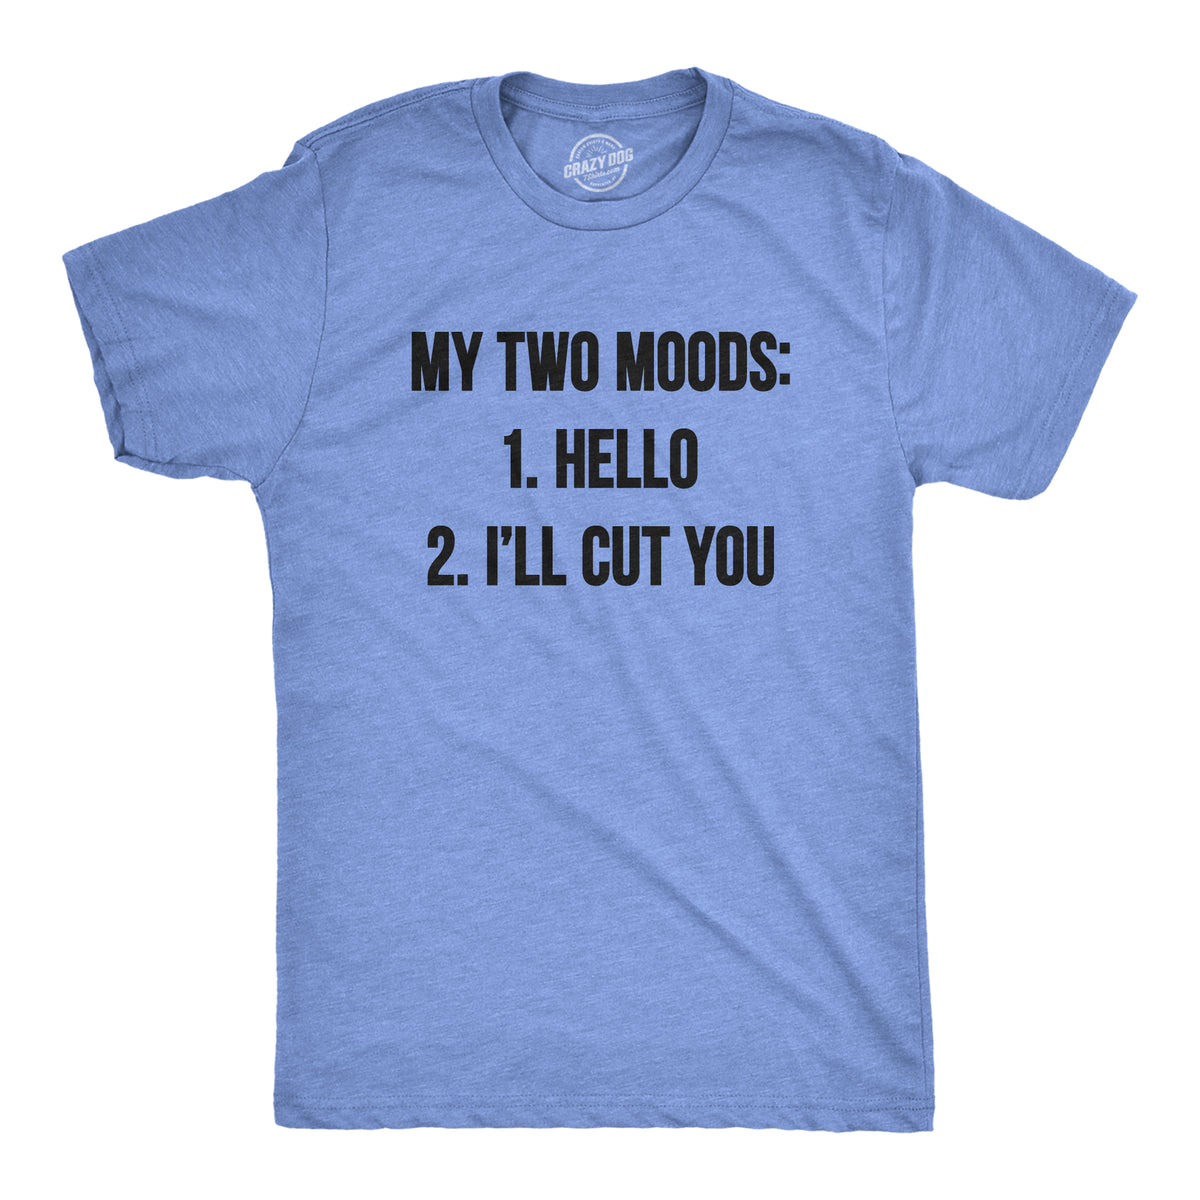 Funny Heather Light Blue My Two Moods Mens T Shirt Nerdy Sarcastic Tee